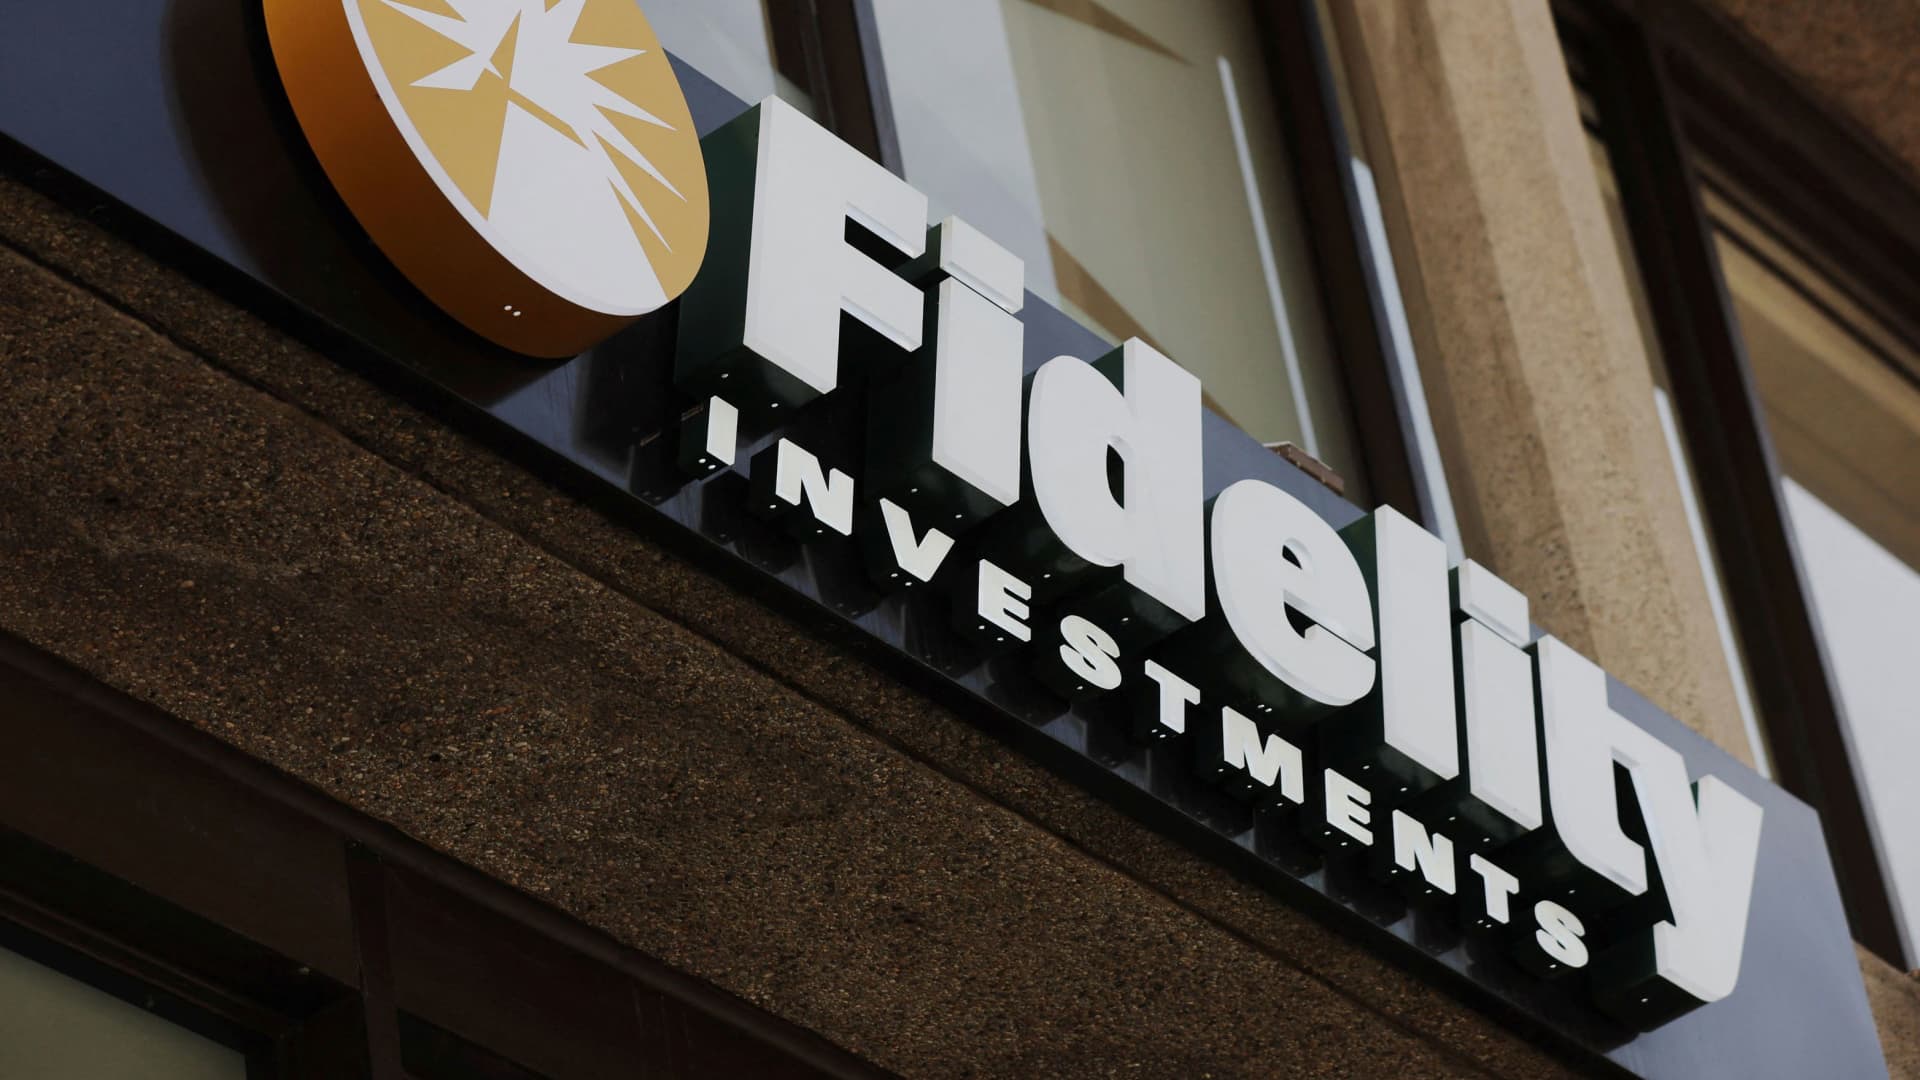 Fidelity joins the rush for a bitcoin ETF, following BlackRock, Ark Invest and others